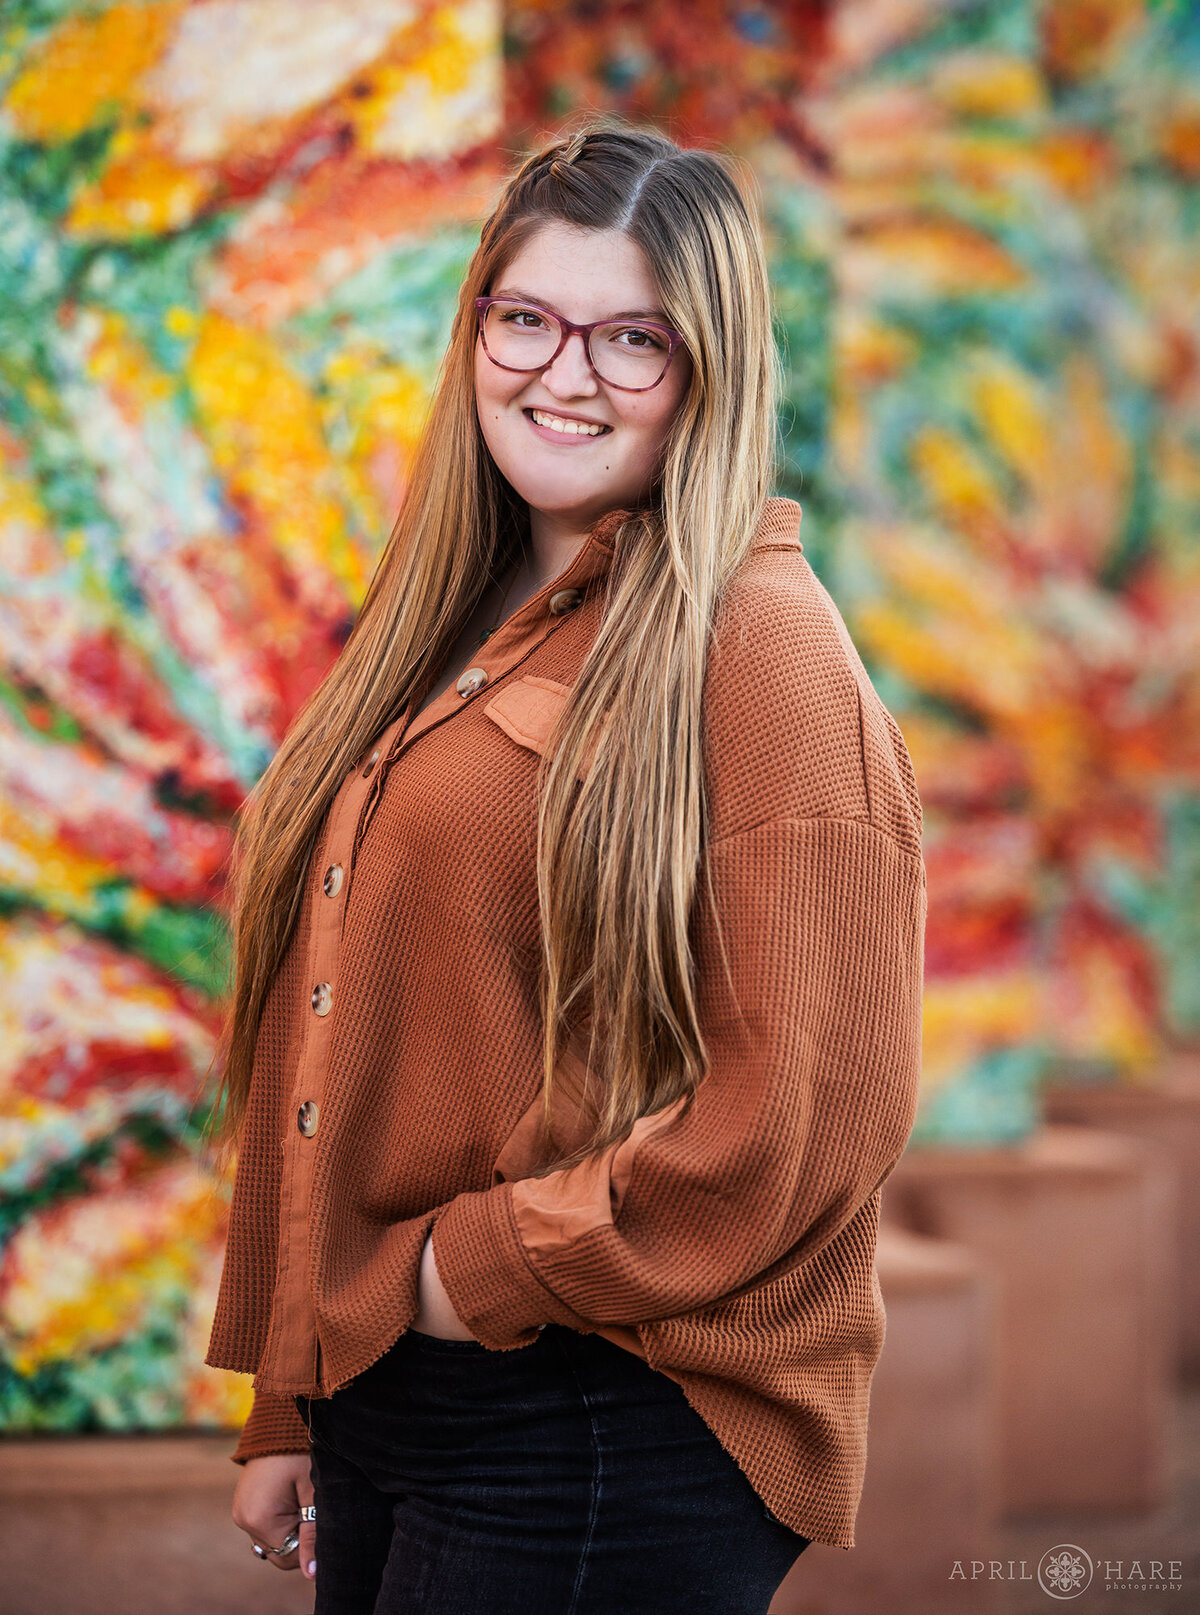 Pretty Colorful Backdrop for a Senior Photo in Downtown Fort Collins Colorado